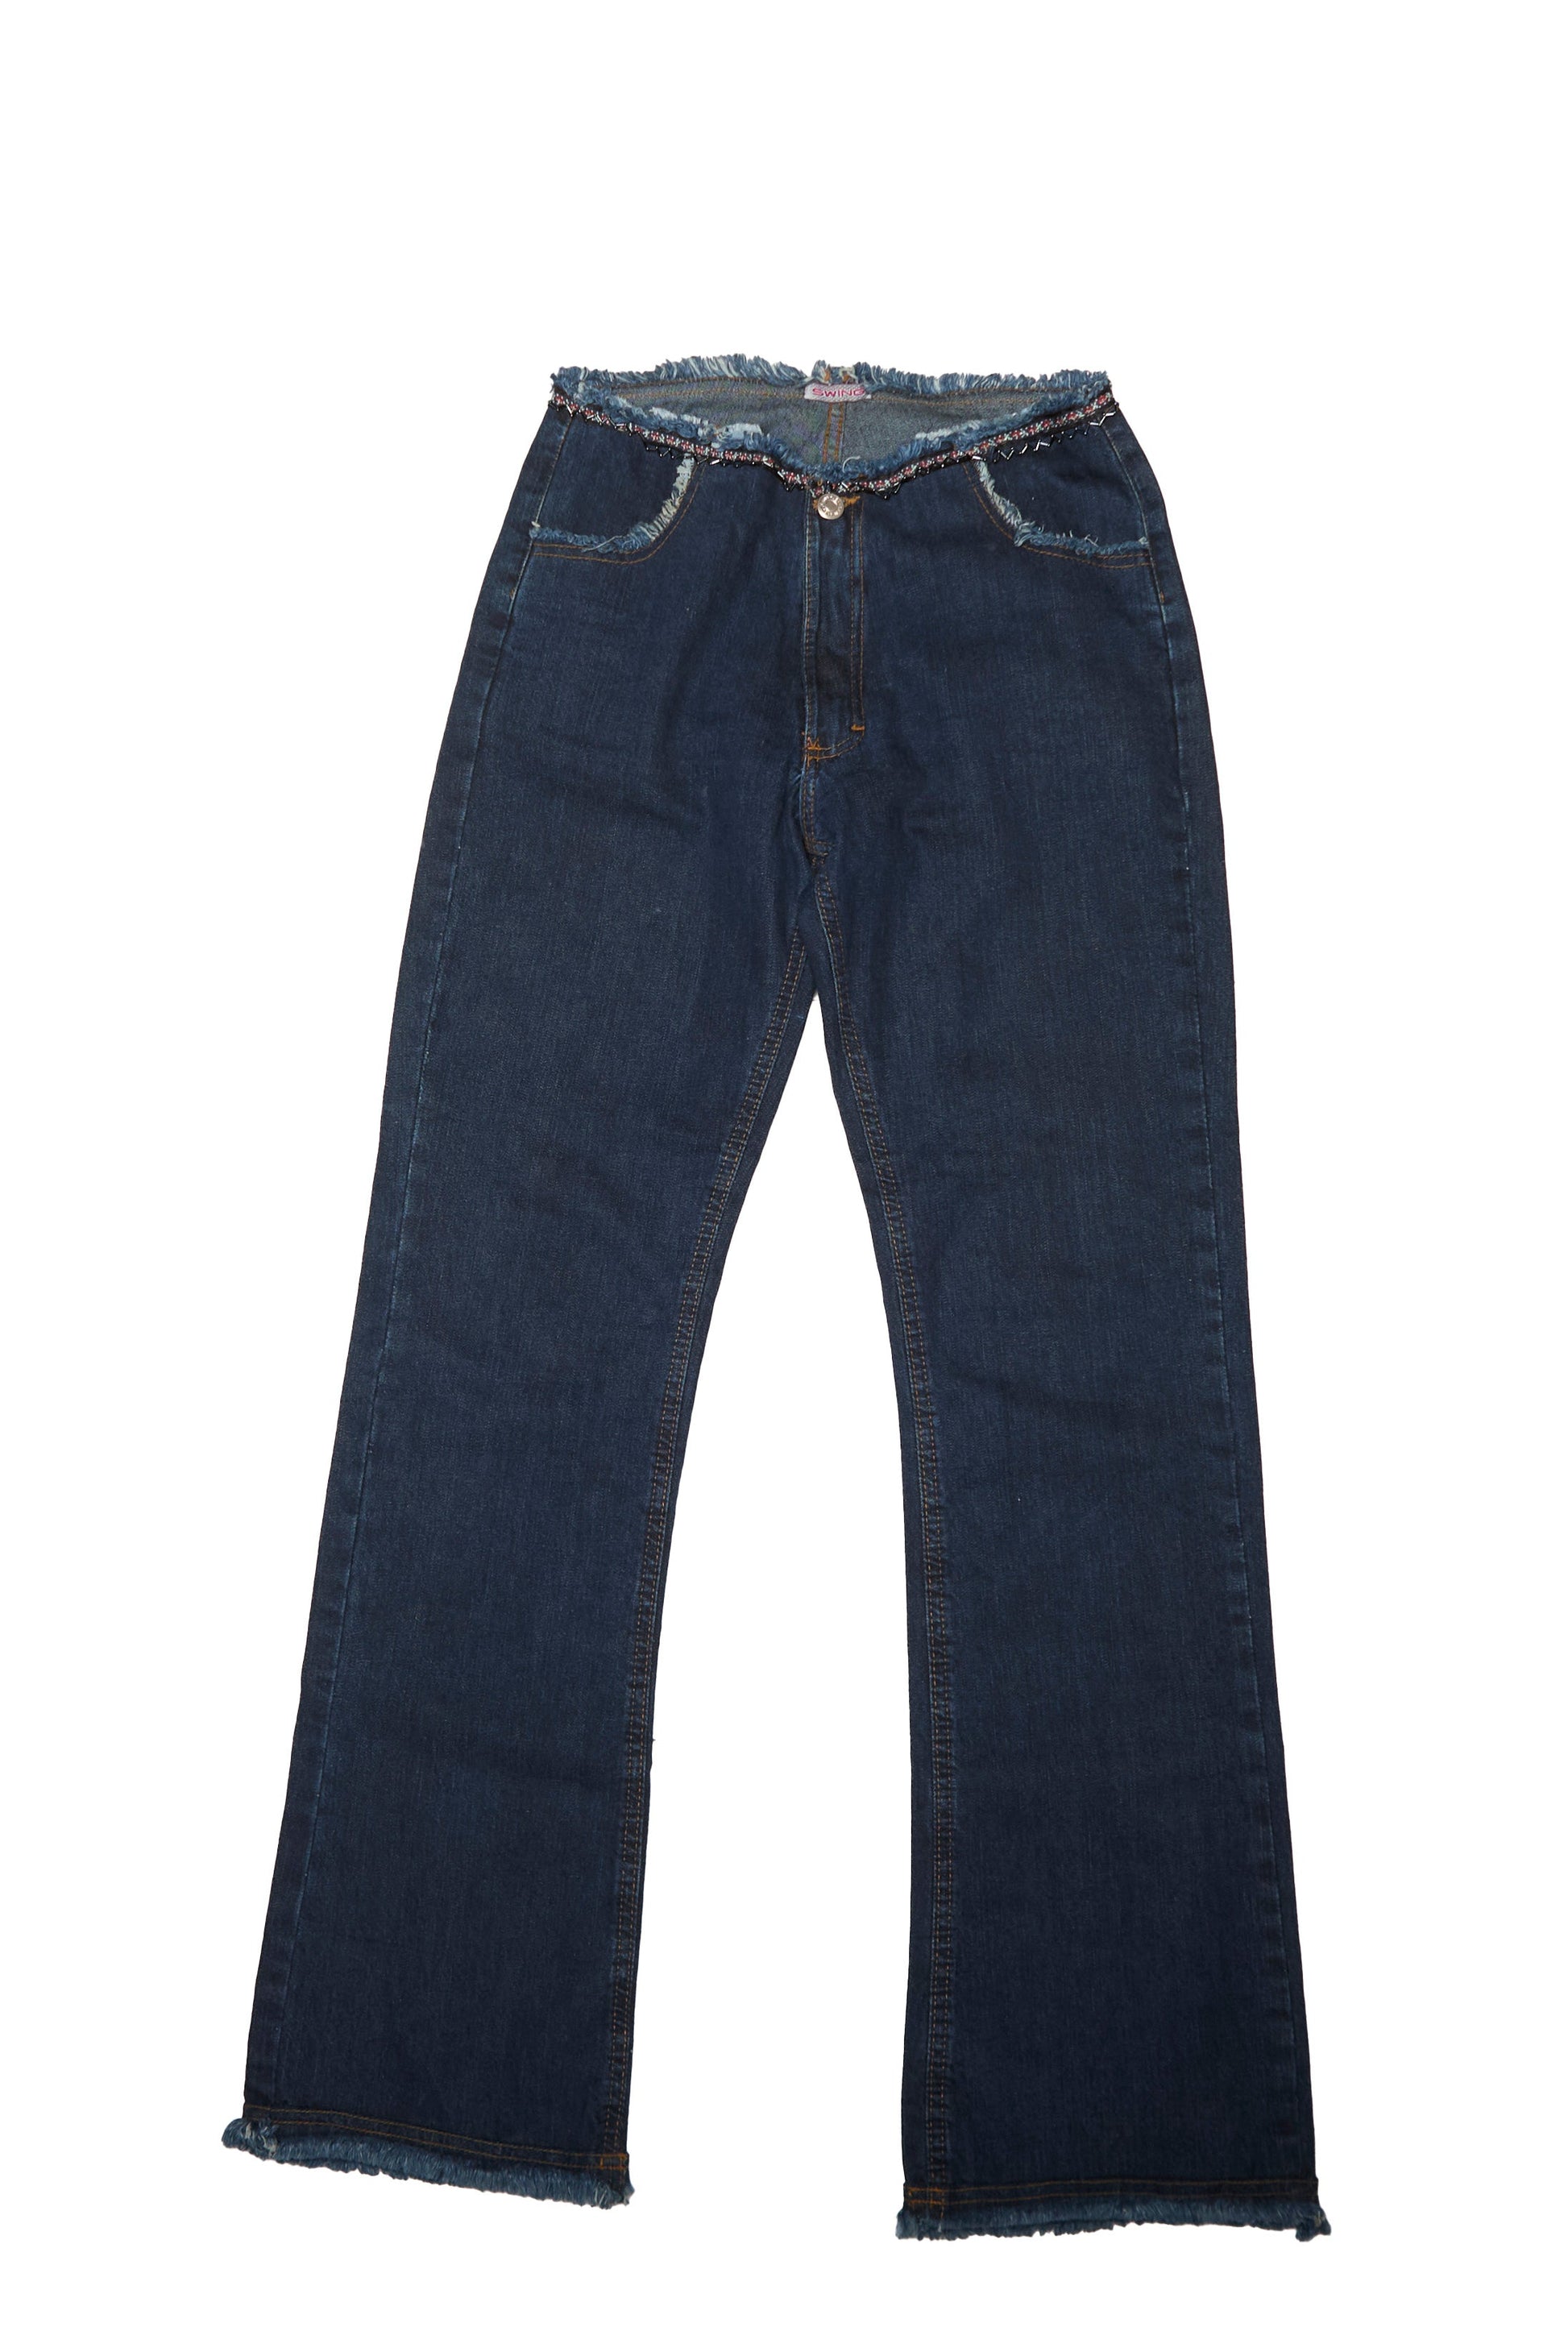 Womens Swing Detailed Flared Jeans - W27" L30"